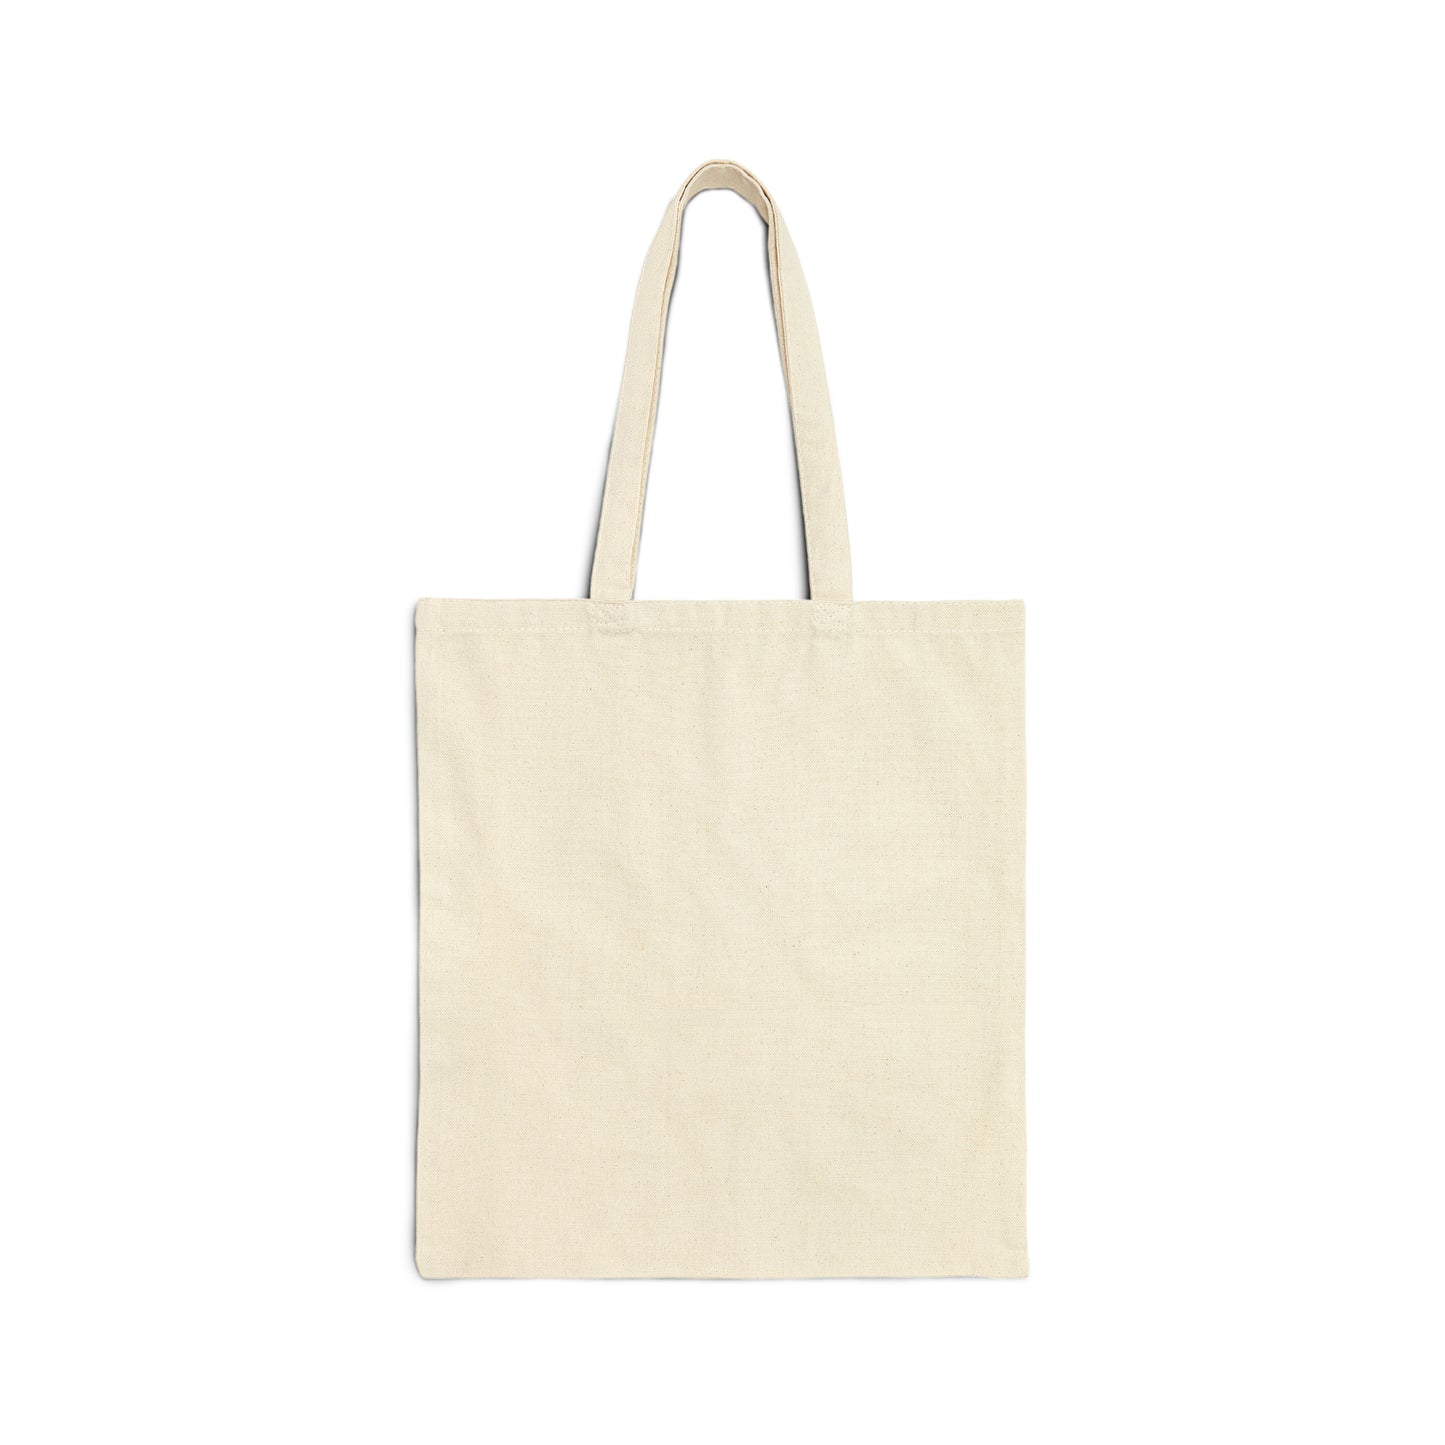 Knitting Queen Cotton Canvas Tote Bag